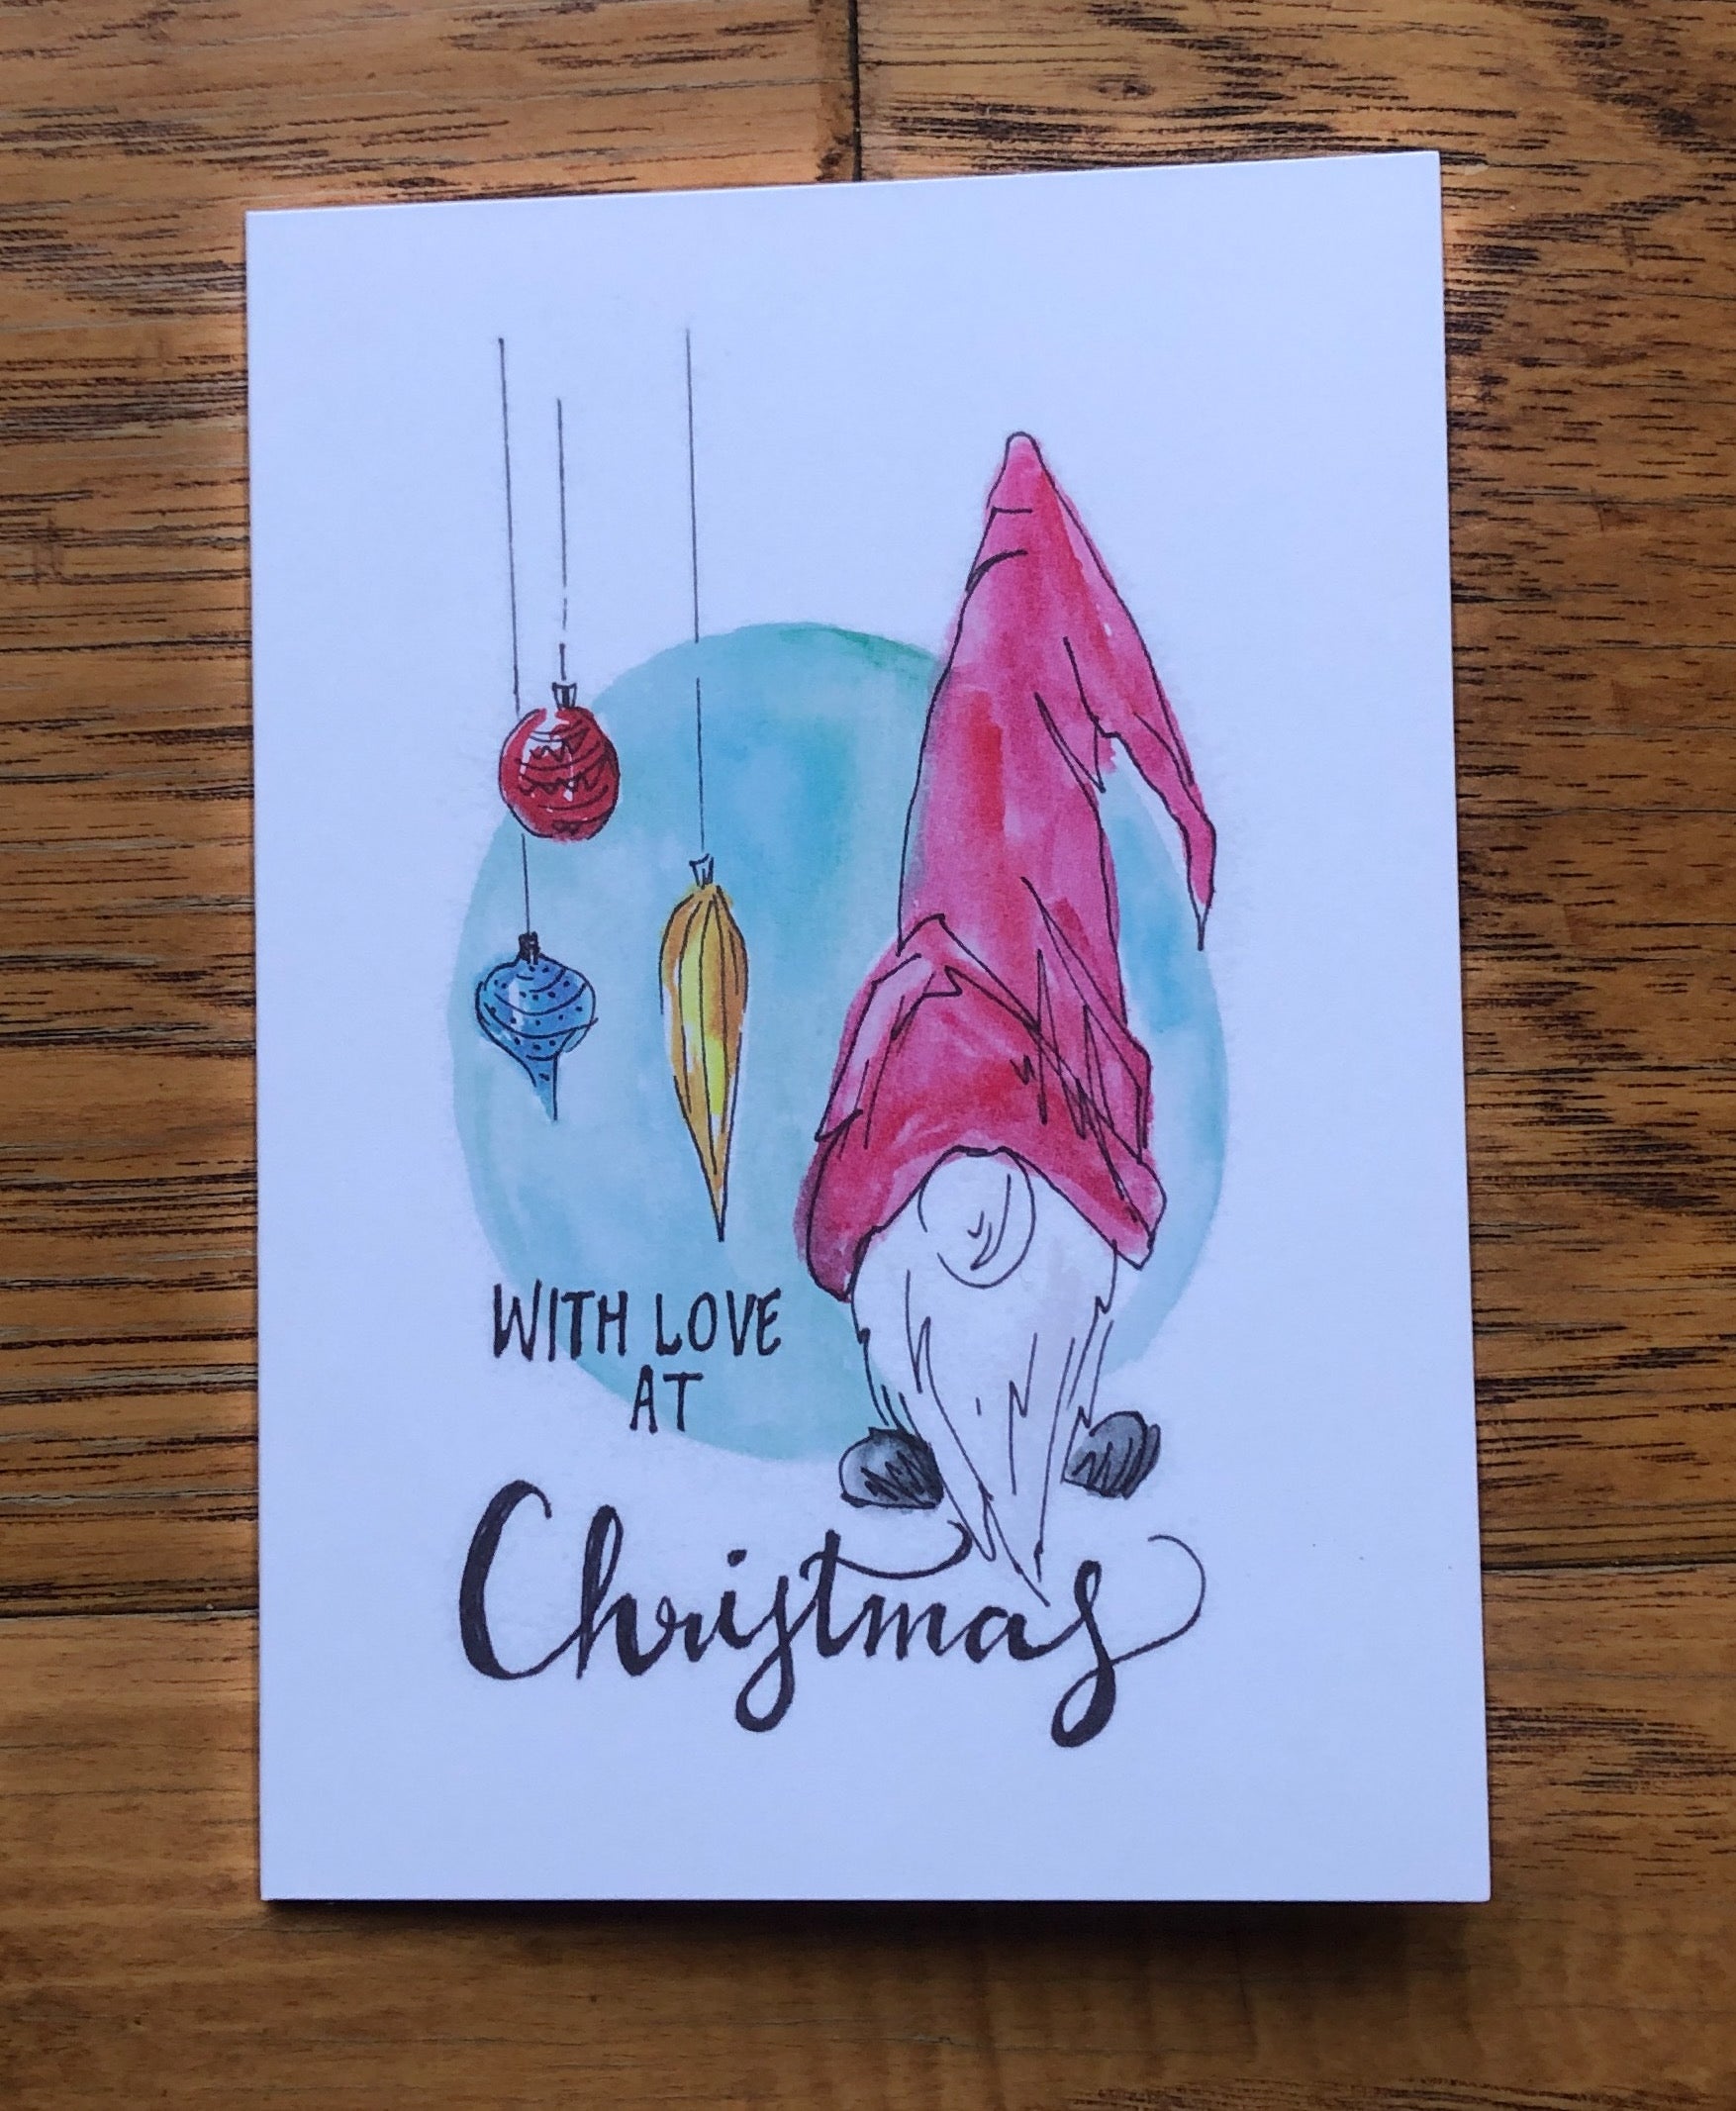 With Love at Christmas